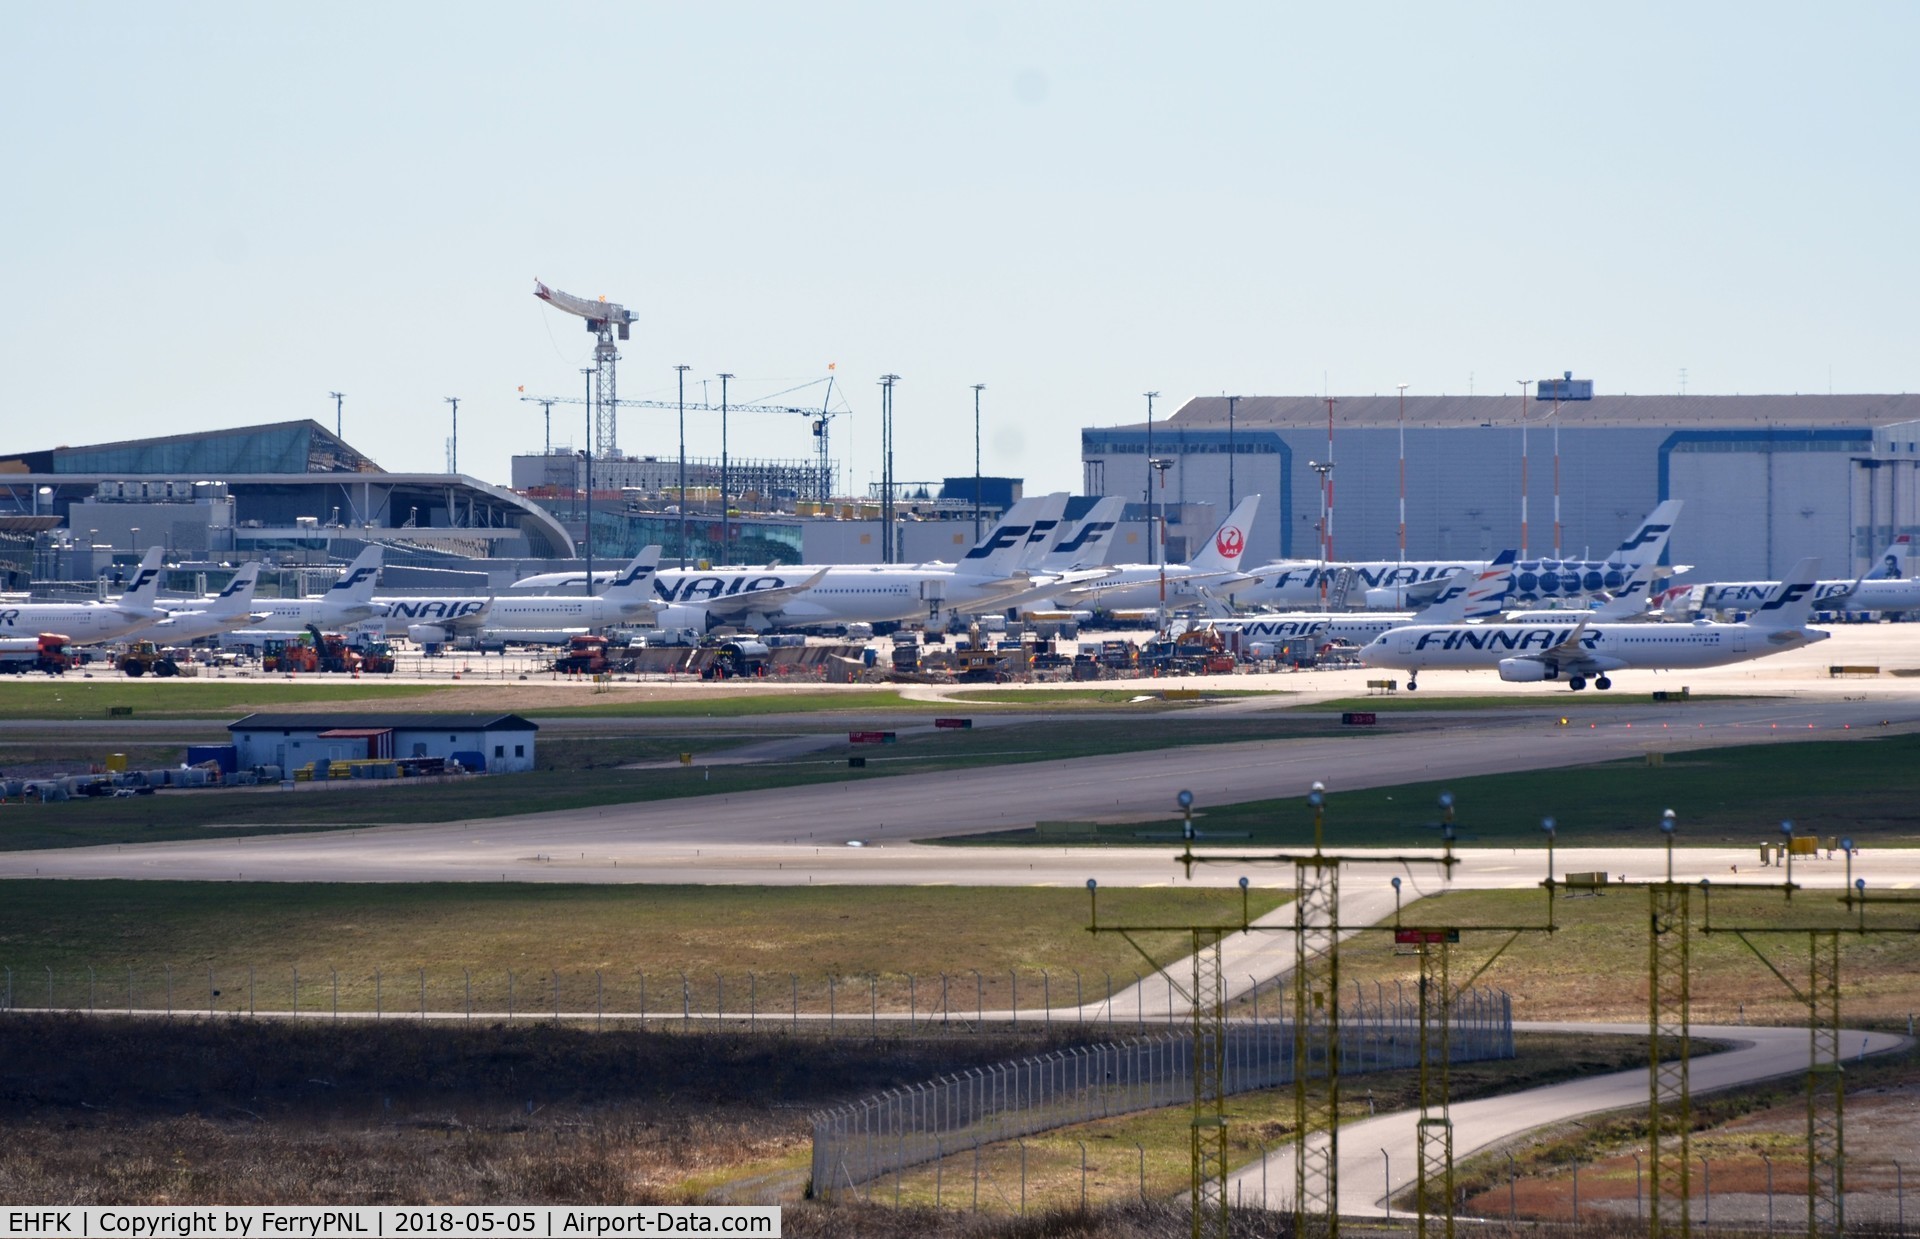 EHFK Airport - Hesinki fills up during afternoon rush hour. Seen from runway 22L .